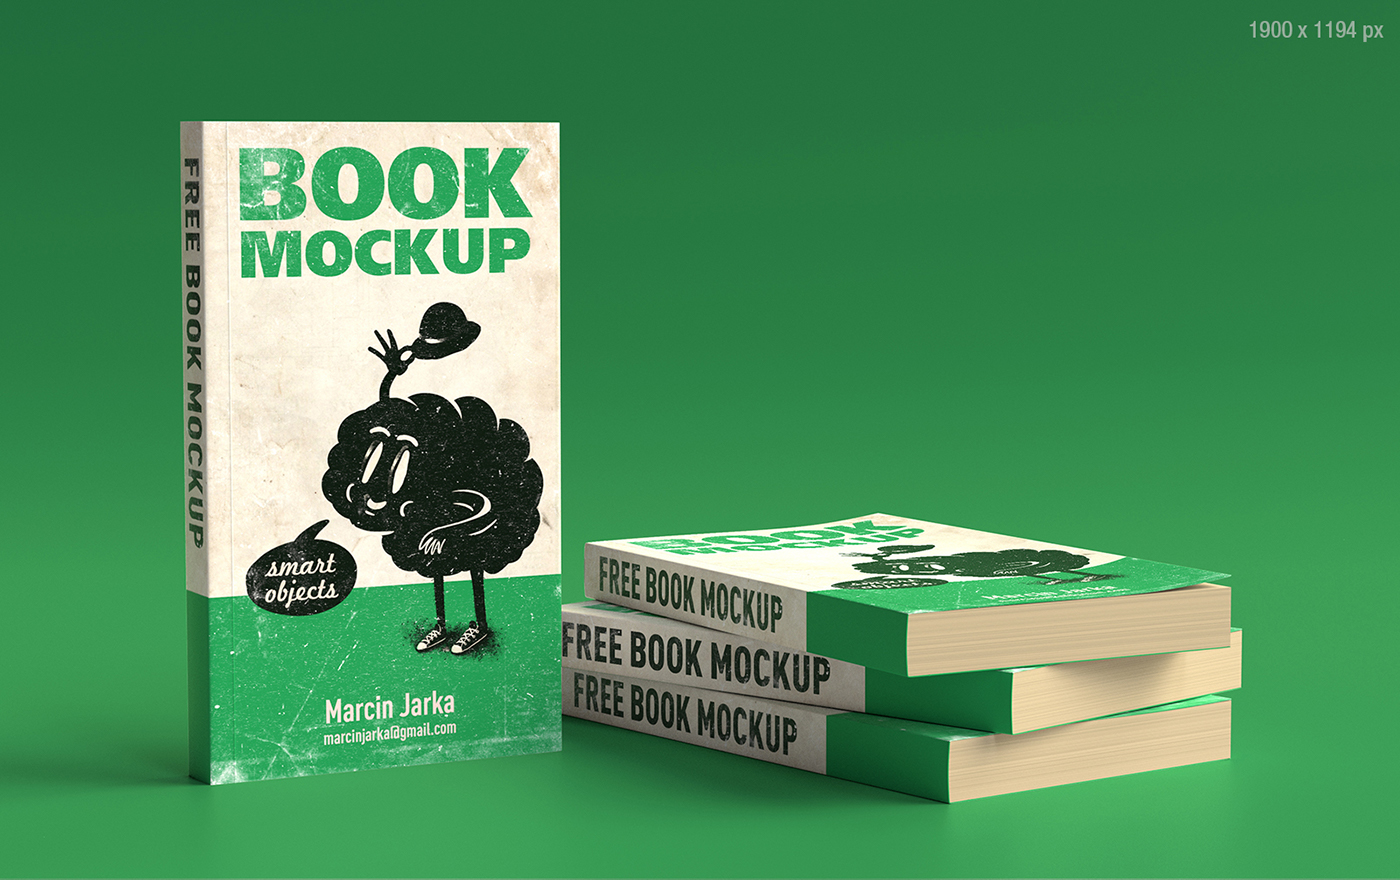 Download 40+ Free PSD Book Cover Mockups for Business and Personal Work & Premium Version! | Free-PSD ...